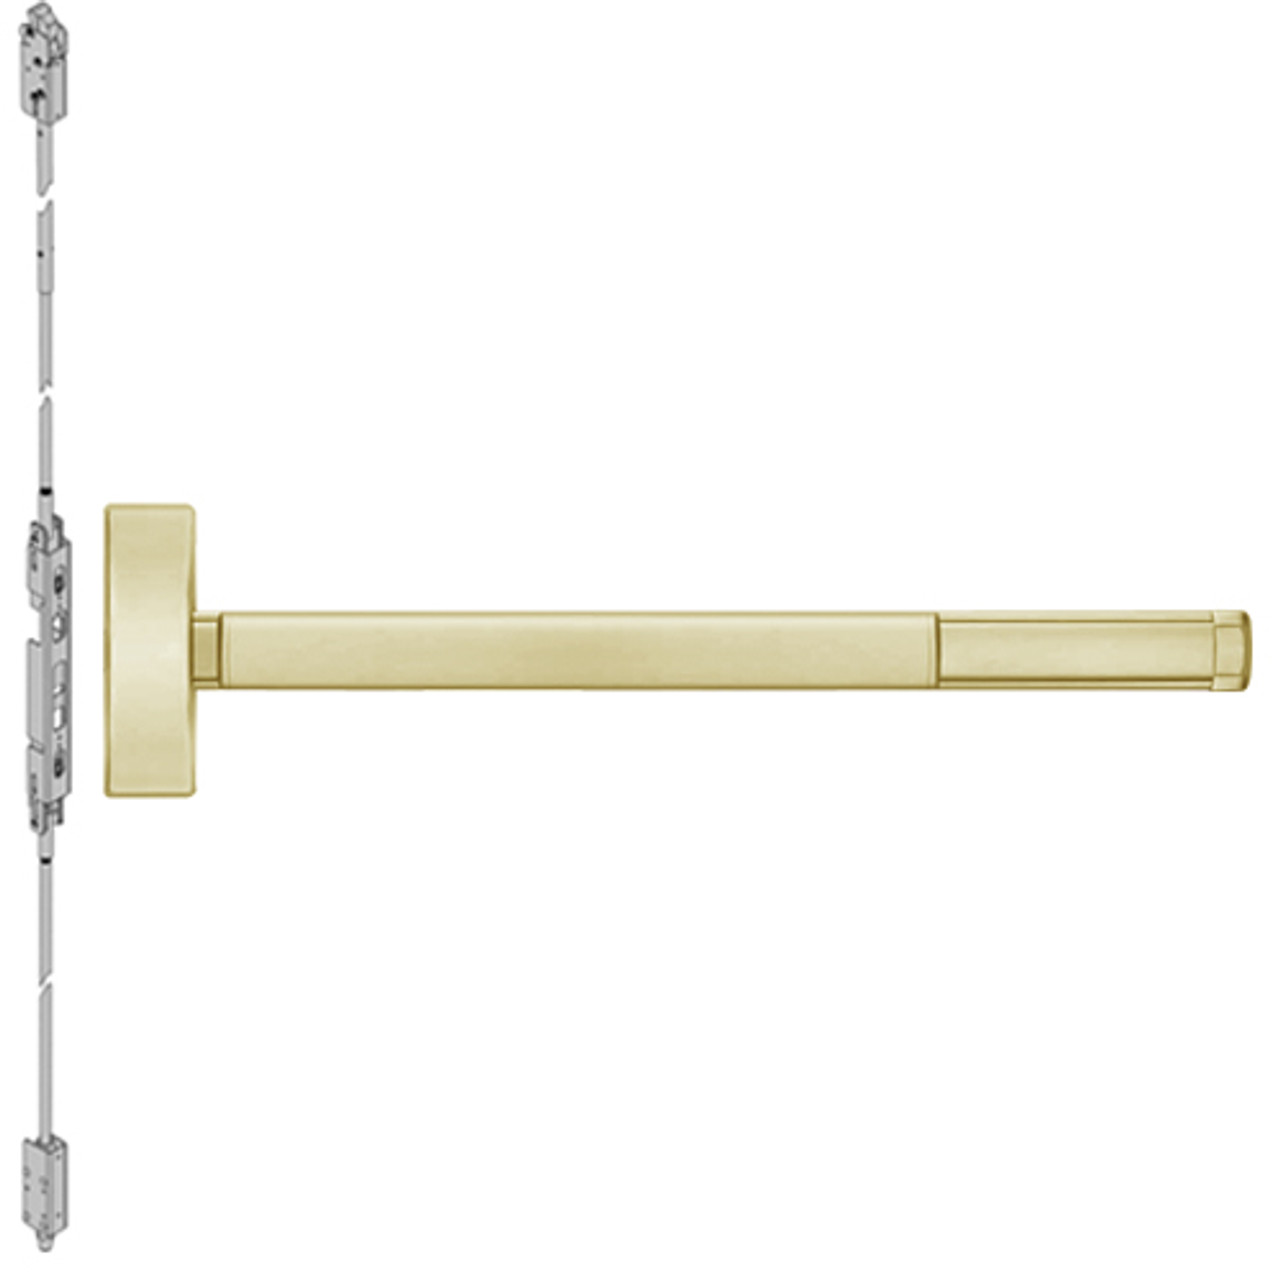 FL2803LBR-606-48 PHI 2800 Series Fire Rated Concealed Vertical Rod Exit Device Prepped for Key Retracts Latchbolt in Satin Brass Finish